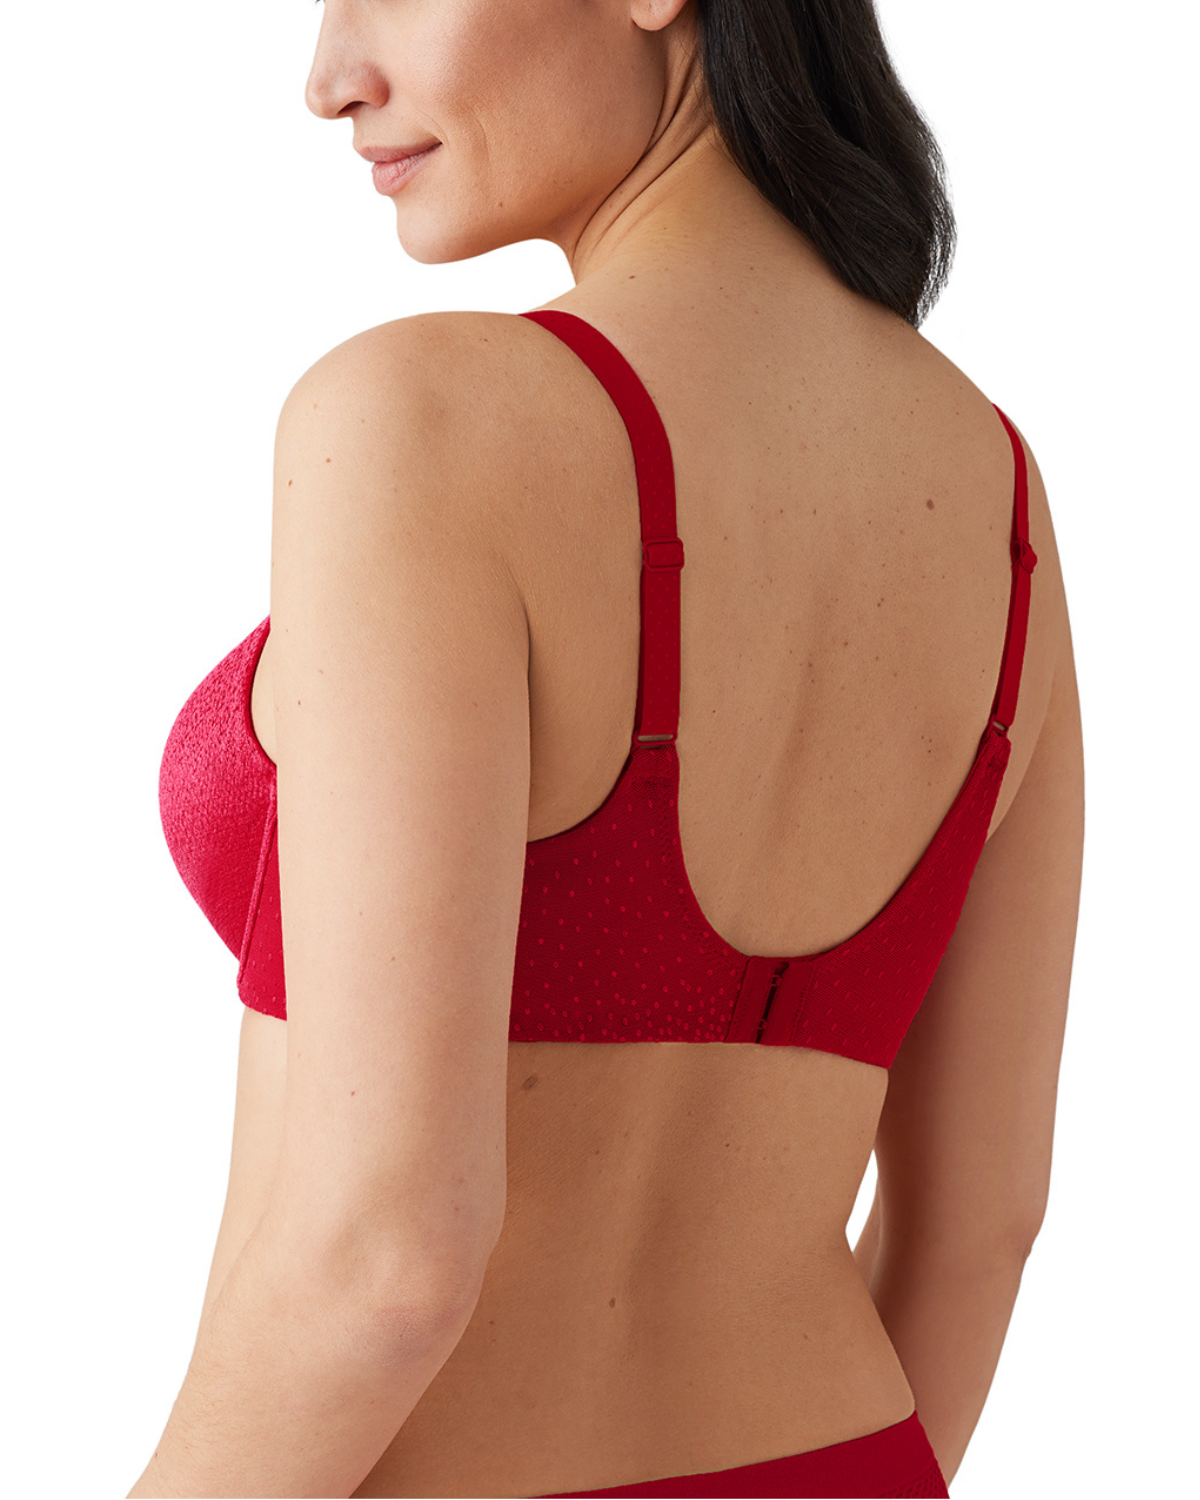 Women's red soft cup underwire bra with wide bands and adjustable straps